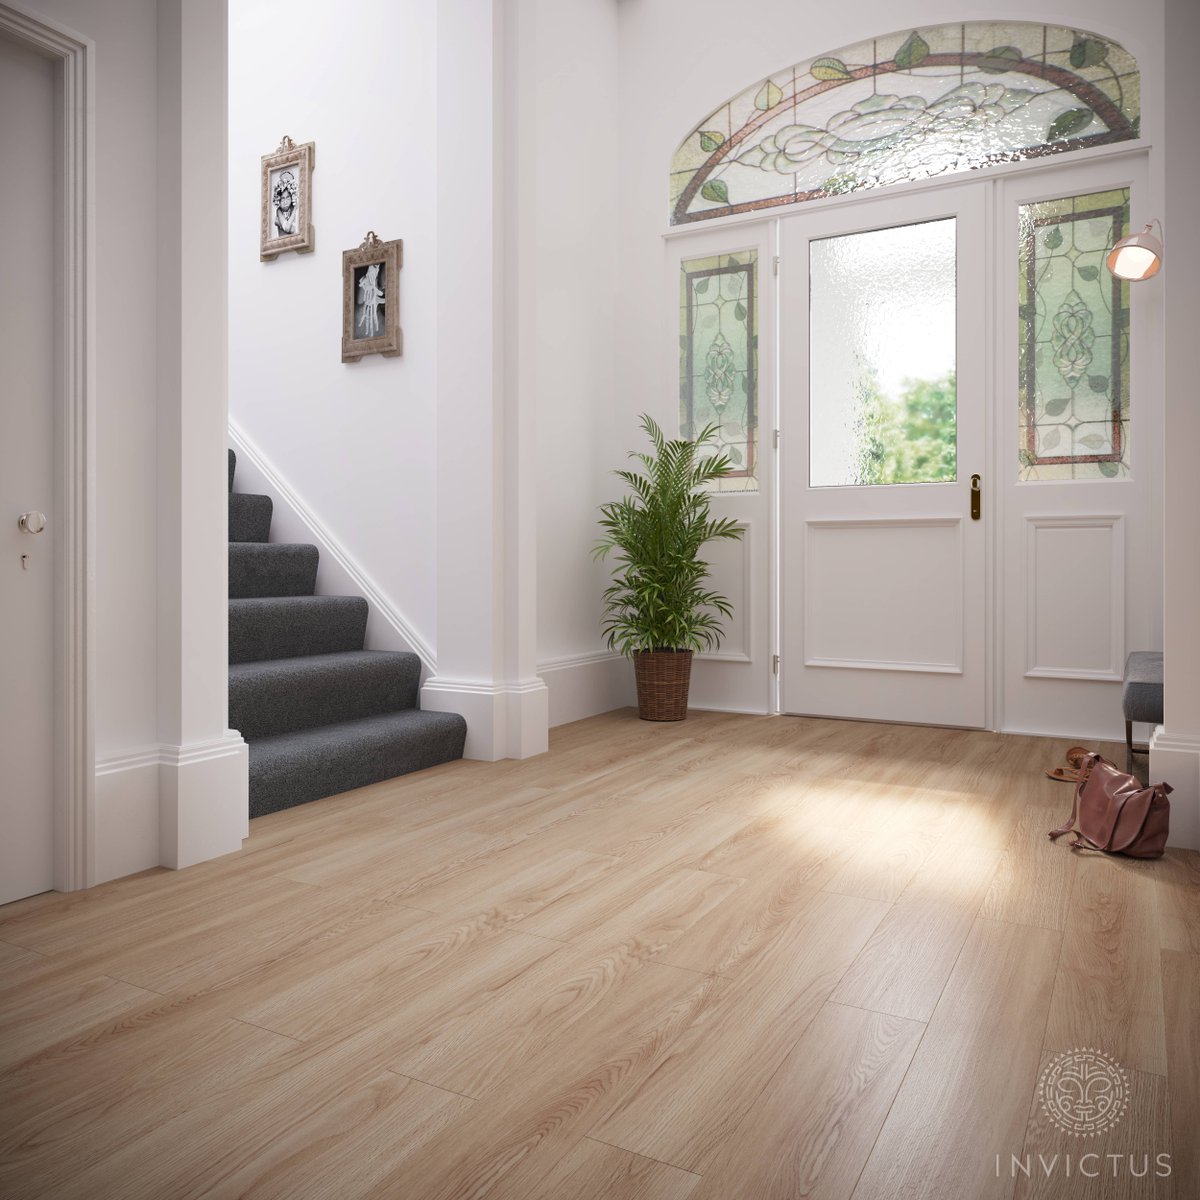 Considering #UnderfloorHeating? It may be #Summer now, but the cold months are just around the corner. 

Pop into our #Worthing or #Storrington showroom to speak to our #FlooringExperts about which #flooring works best with underfloor heating 😊

📸 - Invictus Carpet Flooring